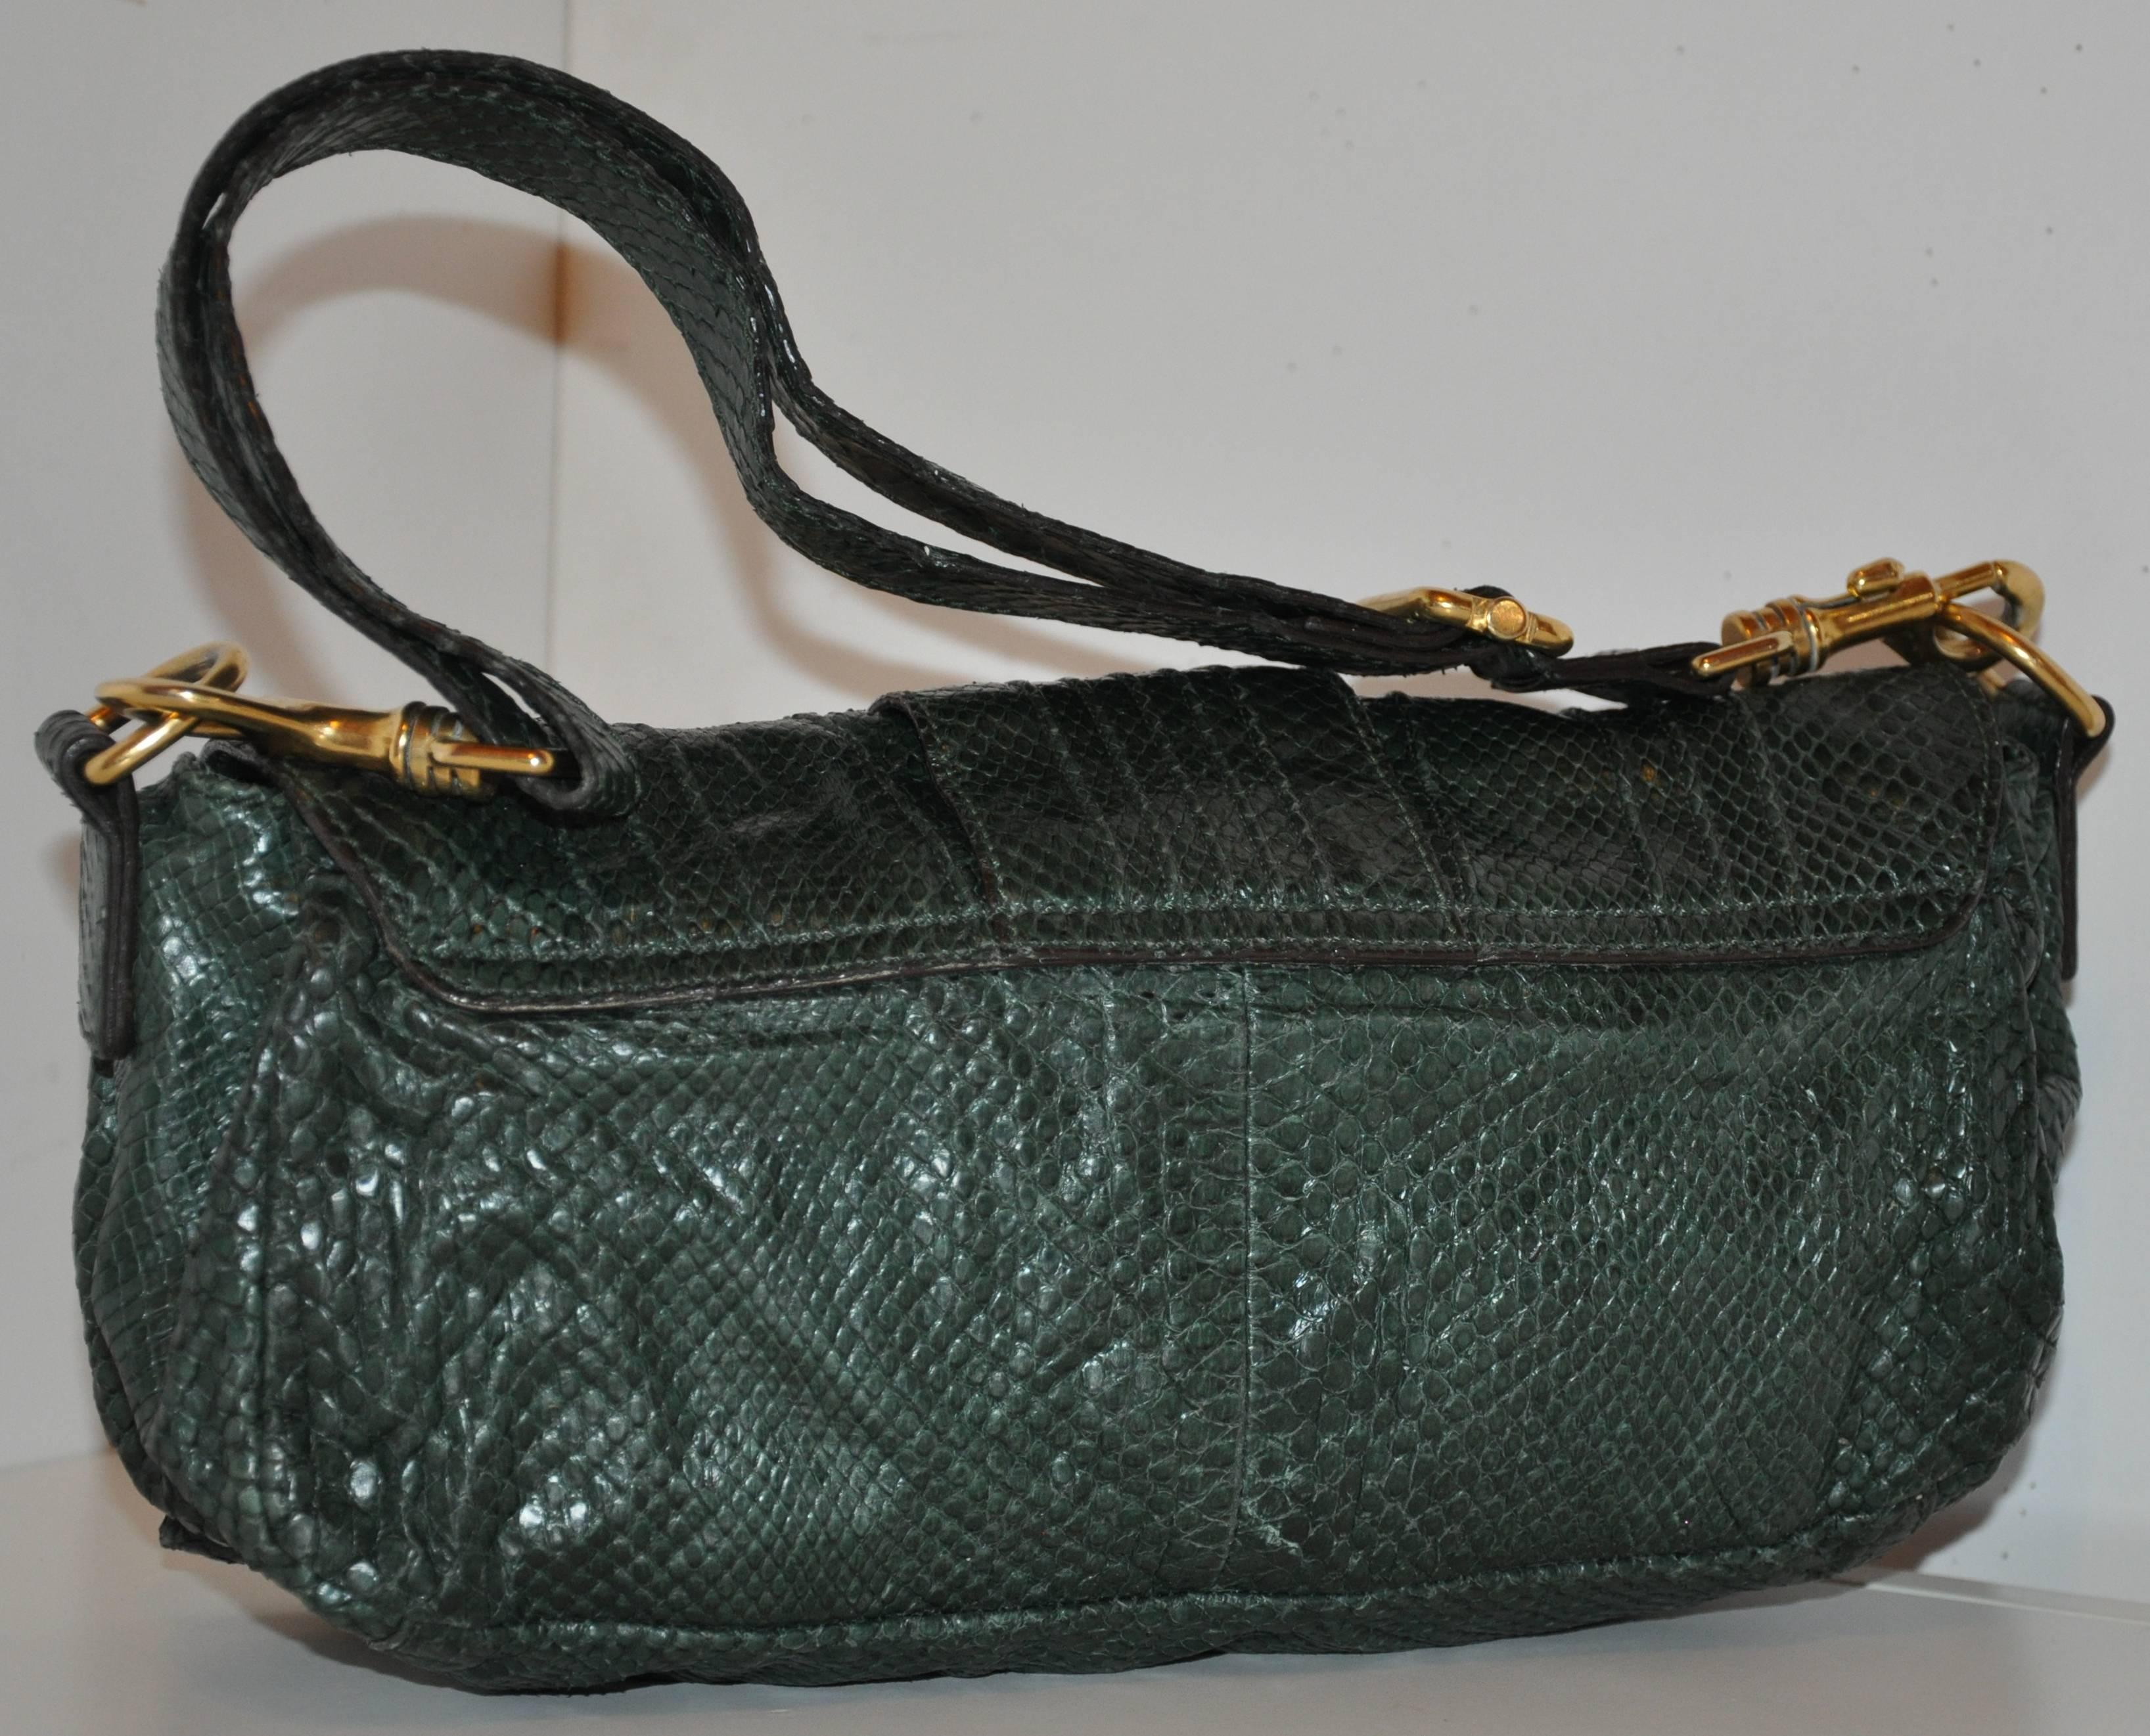           Escada's wonderfully detailed forest green lizard skin flap-over shoulder bag is accented with removable shoulder straps for used as a clutch if desire. The shoulder straps are adjustable measuring 1 1/8" x 31". There are three